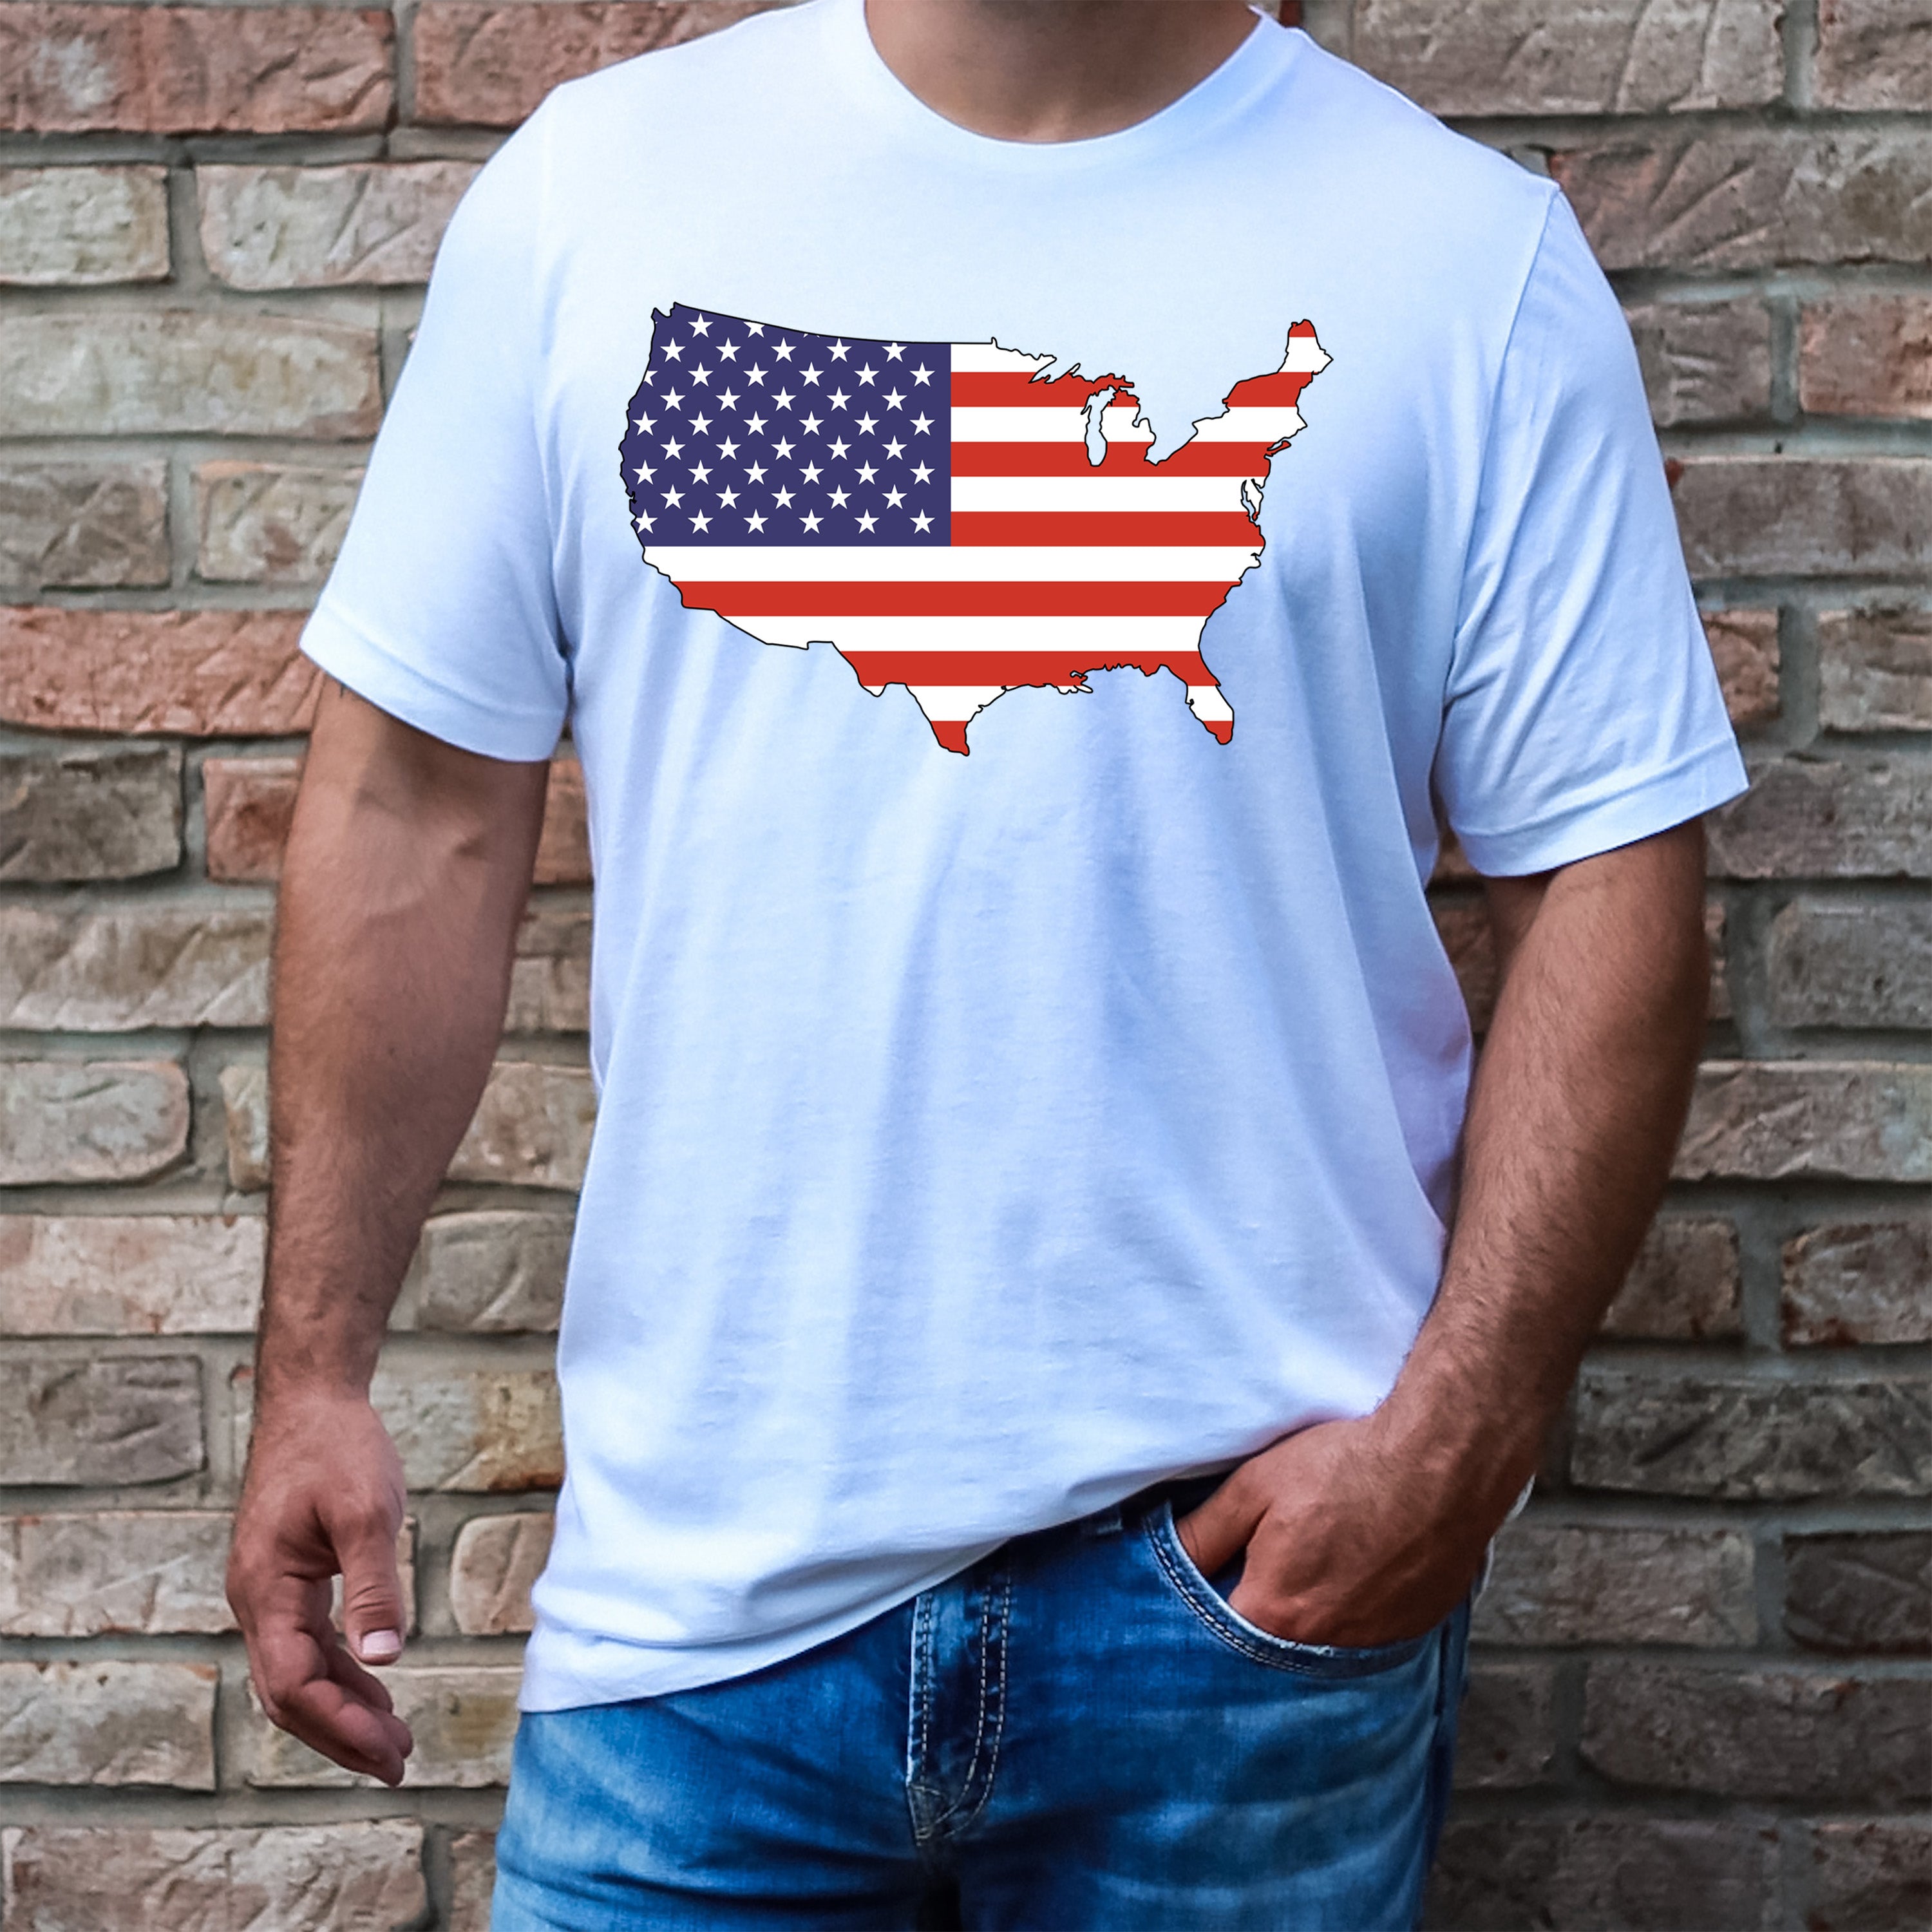 USA FLAG WITH MAP -Men's Tee